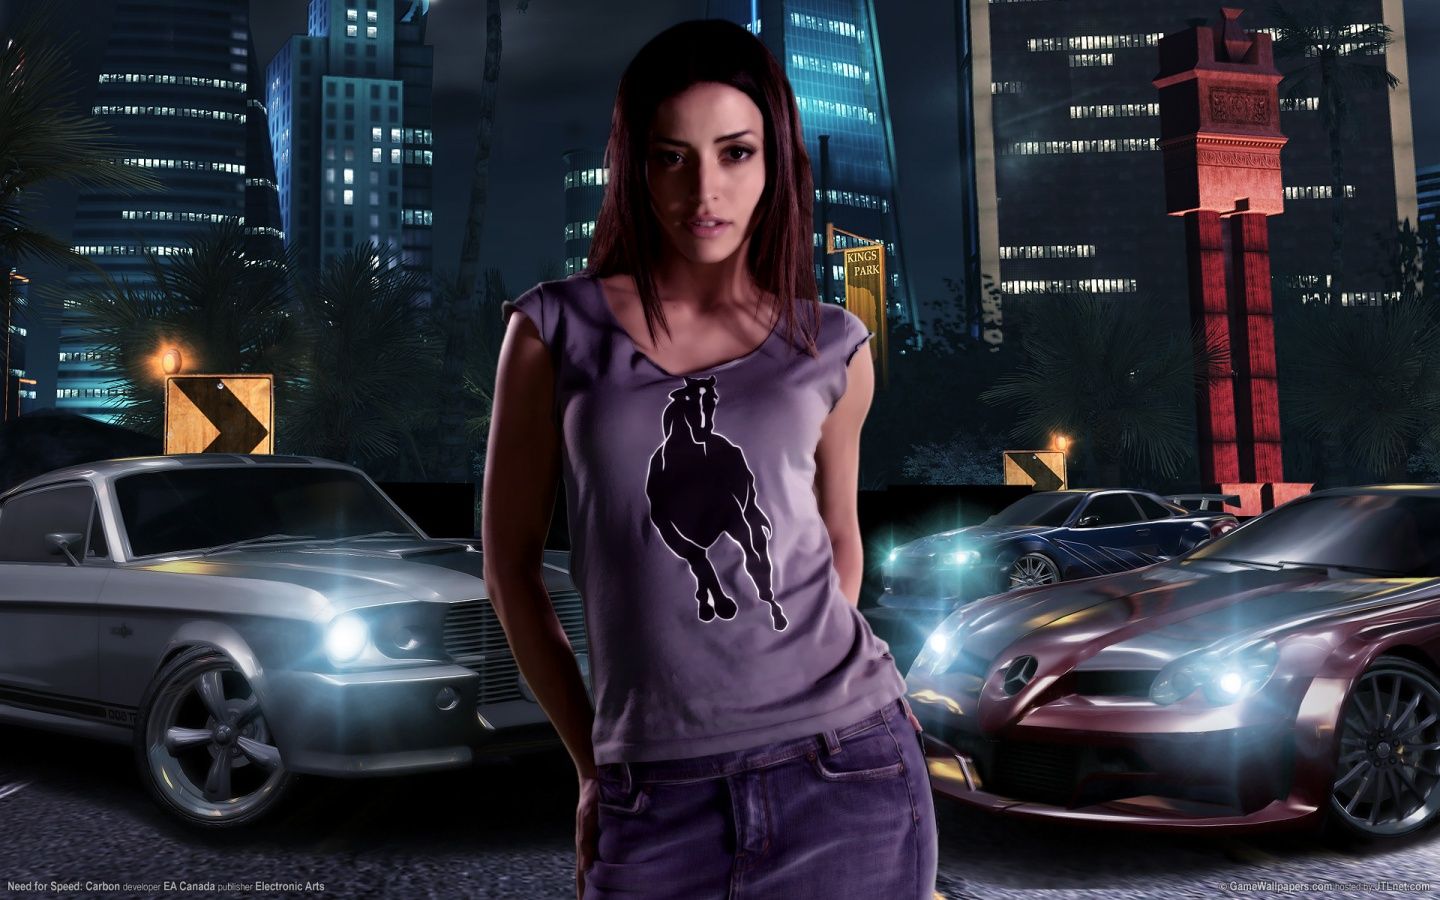 Need for speed carbon Girl 2 Wallpaper in jpg format for free